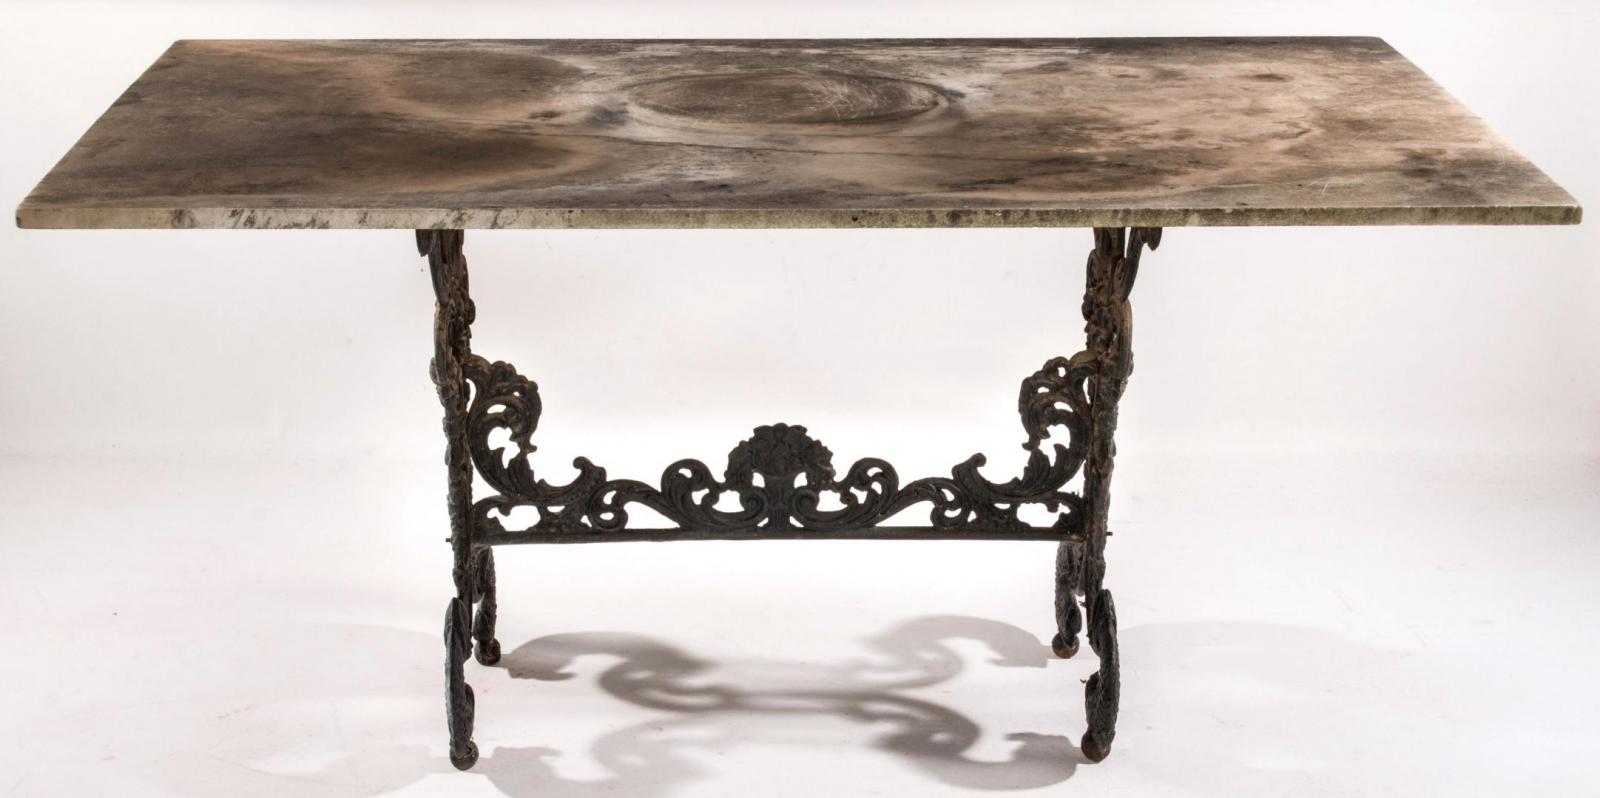 A 19TH CENTURY CAST IRON GARDEN TABLE WITH MARBLE TOP